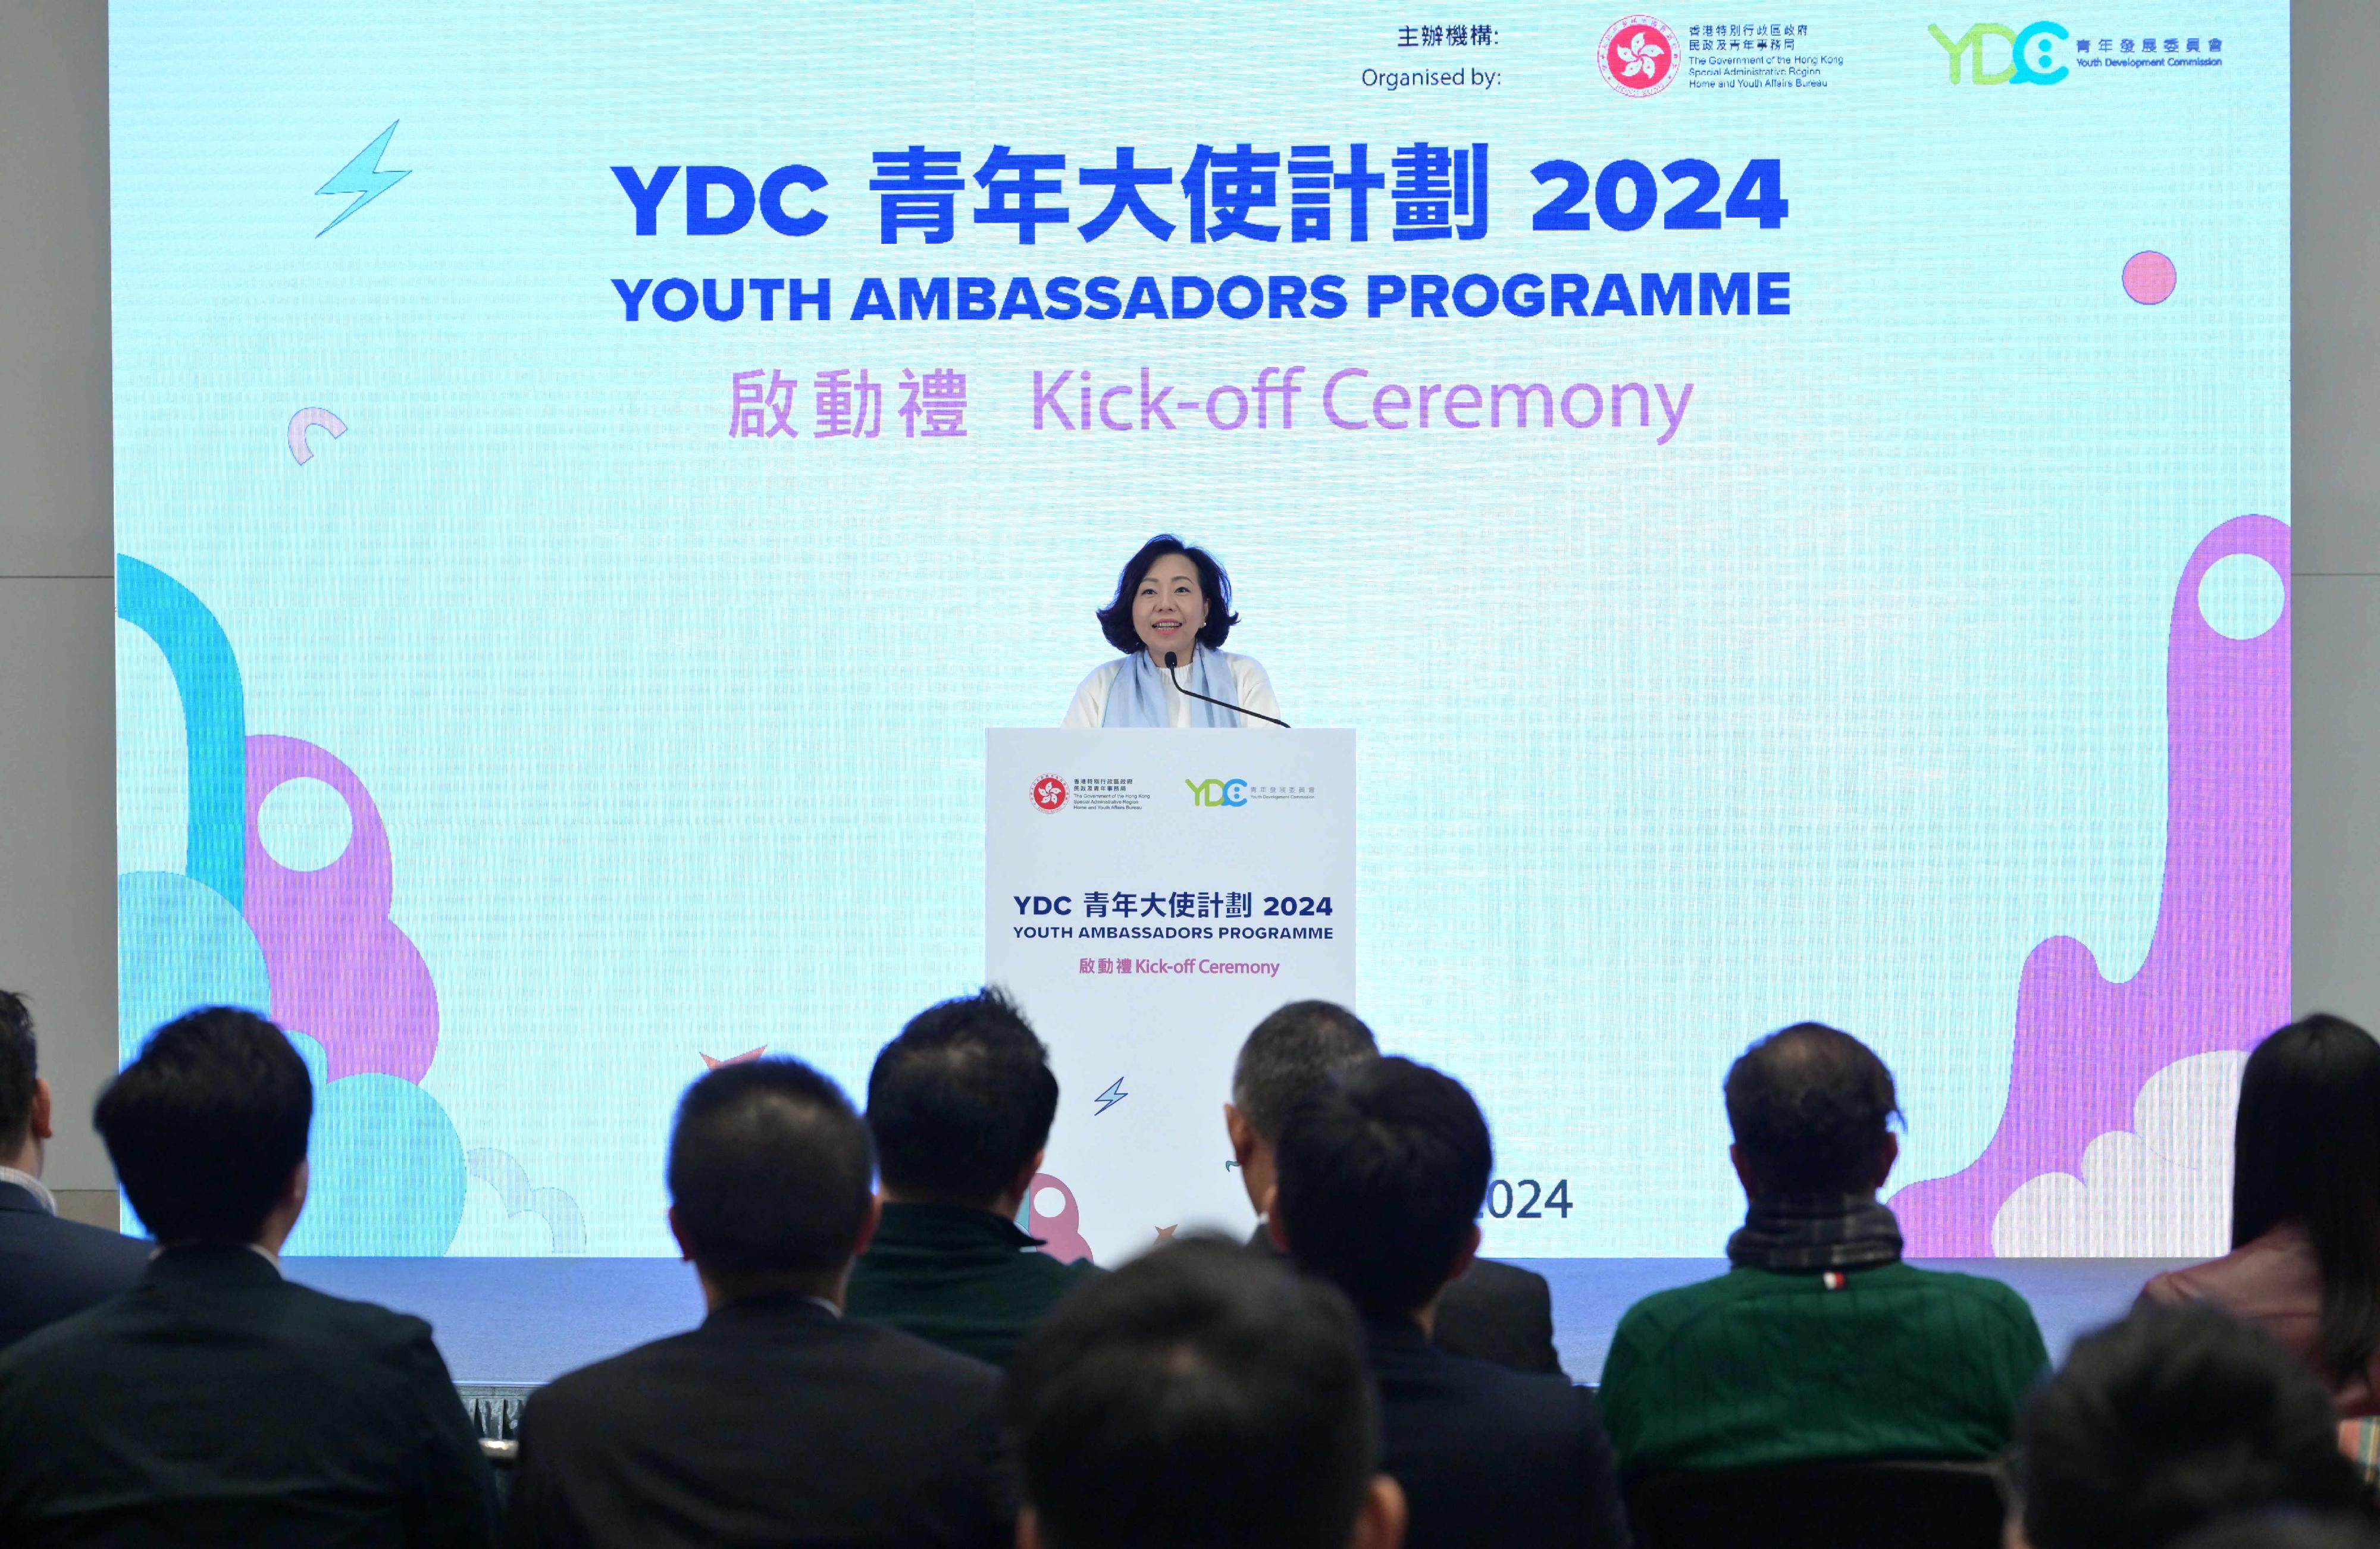 The Secretary for Home and Youth Affairs, Miss Alice Mak, officiated at the kick-off ceremony of the YDC Youth Ambassadors Programme 2024 today (January 27). Photo shows Miss Mak delivering a speech at the ceremony.